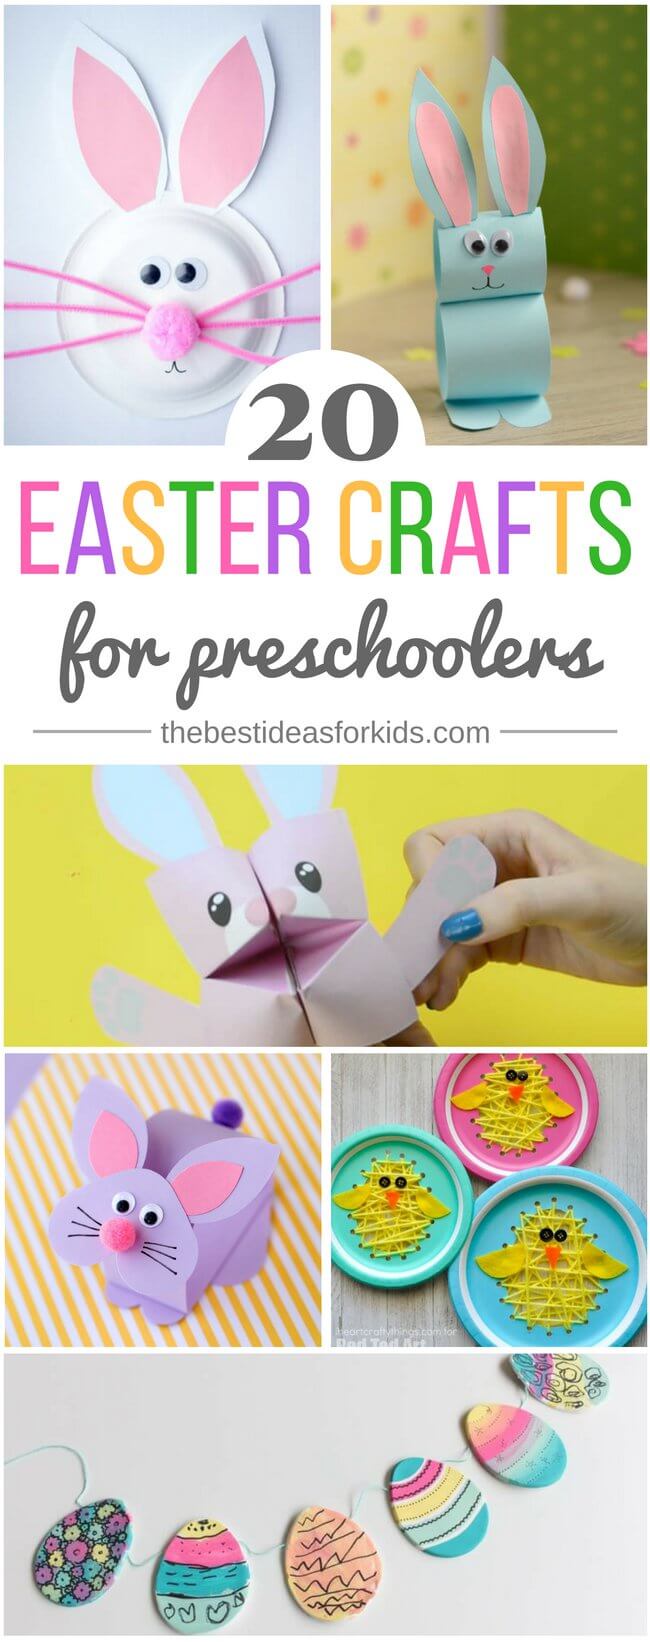 18 Adorable Easter Crafts for Creative Kids